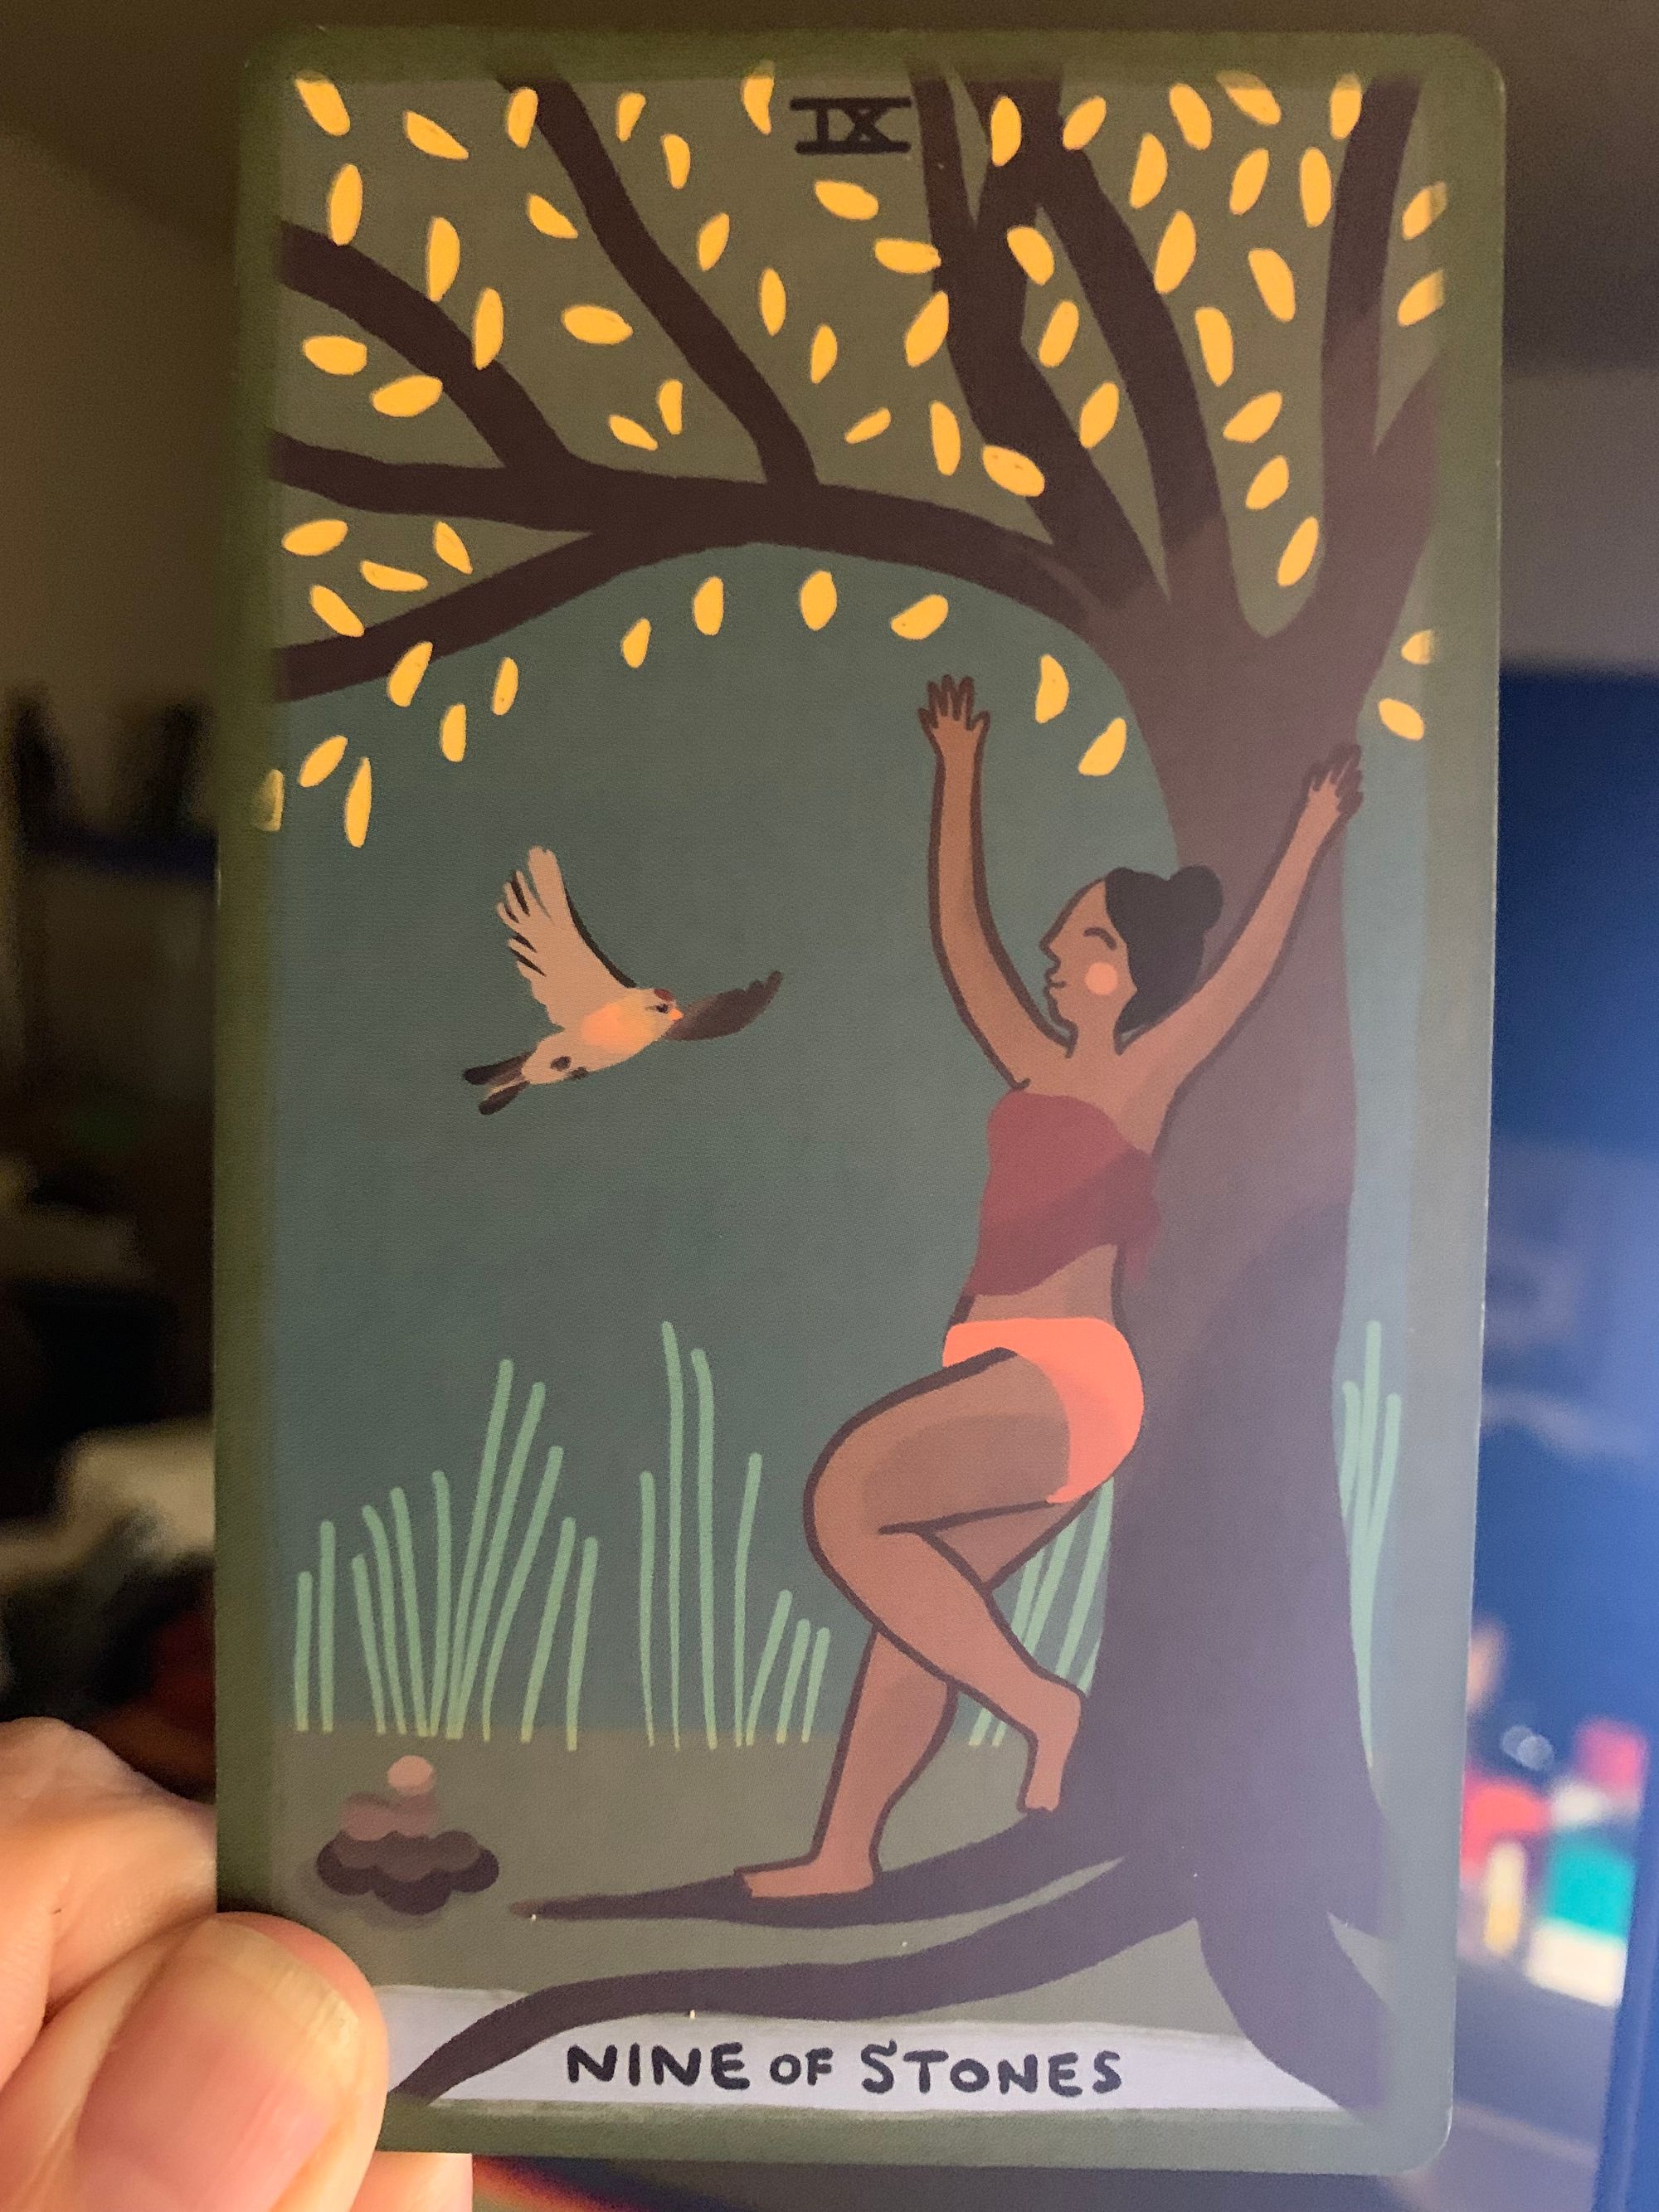 A tarot card, the nine of stones, featuring a brown smiling person beneath a tree with their arms up. Tall grasses grow behind the person and their pile of nine stones, and the tree hangs glorious golden leaves above them.